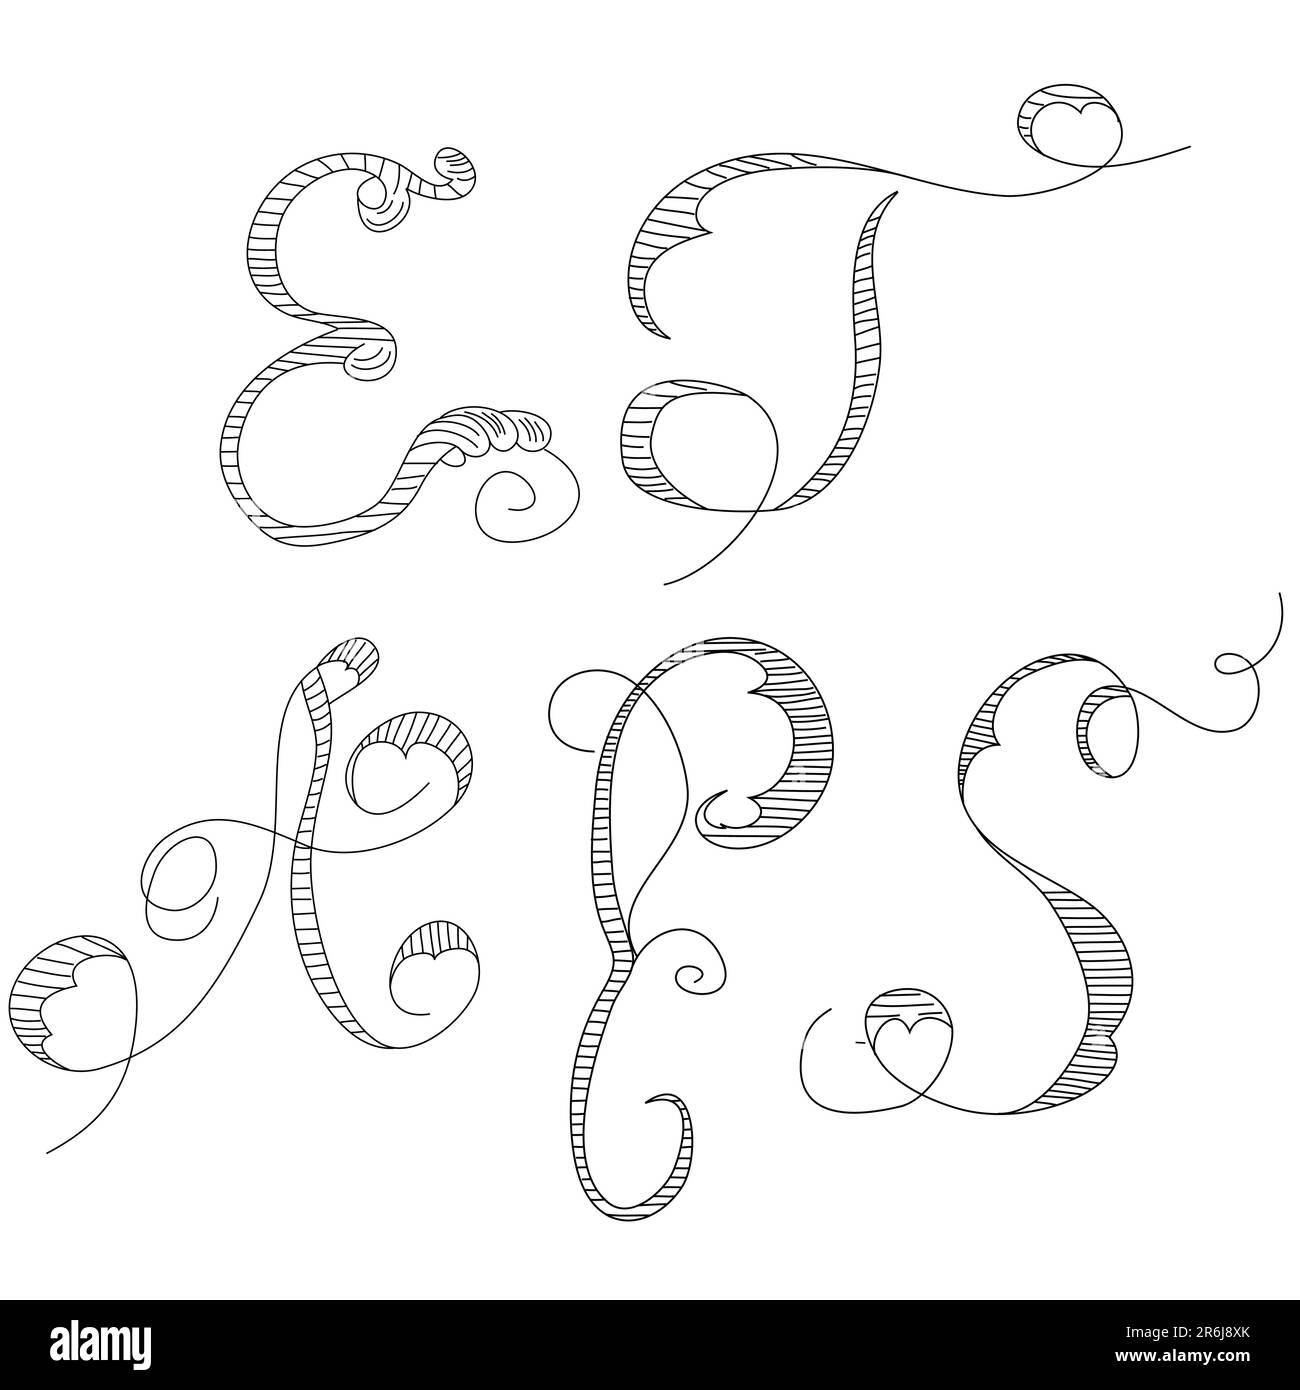 Hand drawn capital letter s Royalty Free Vector Image